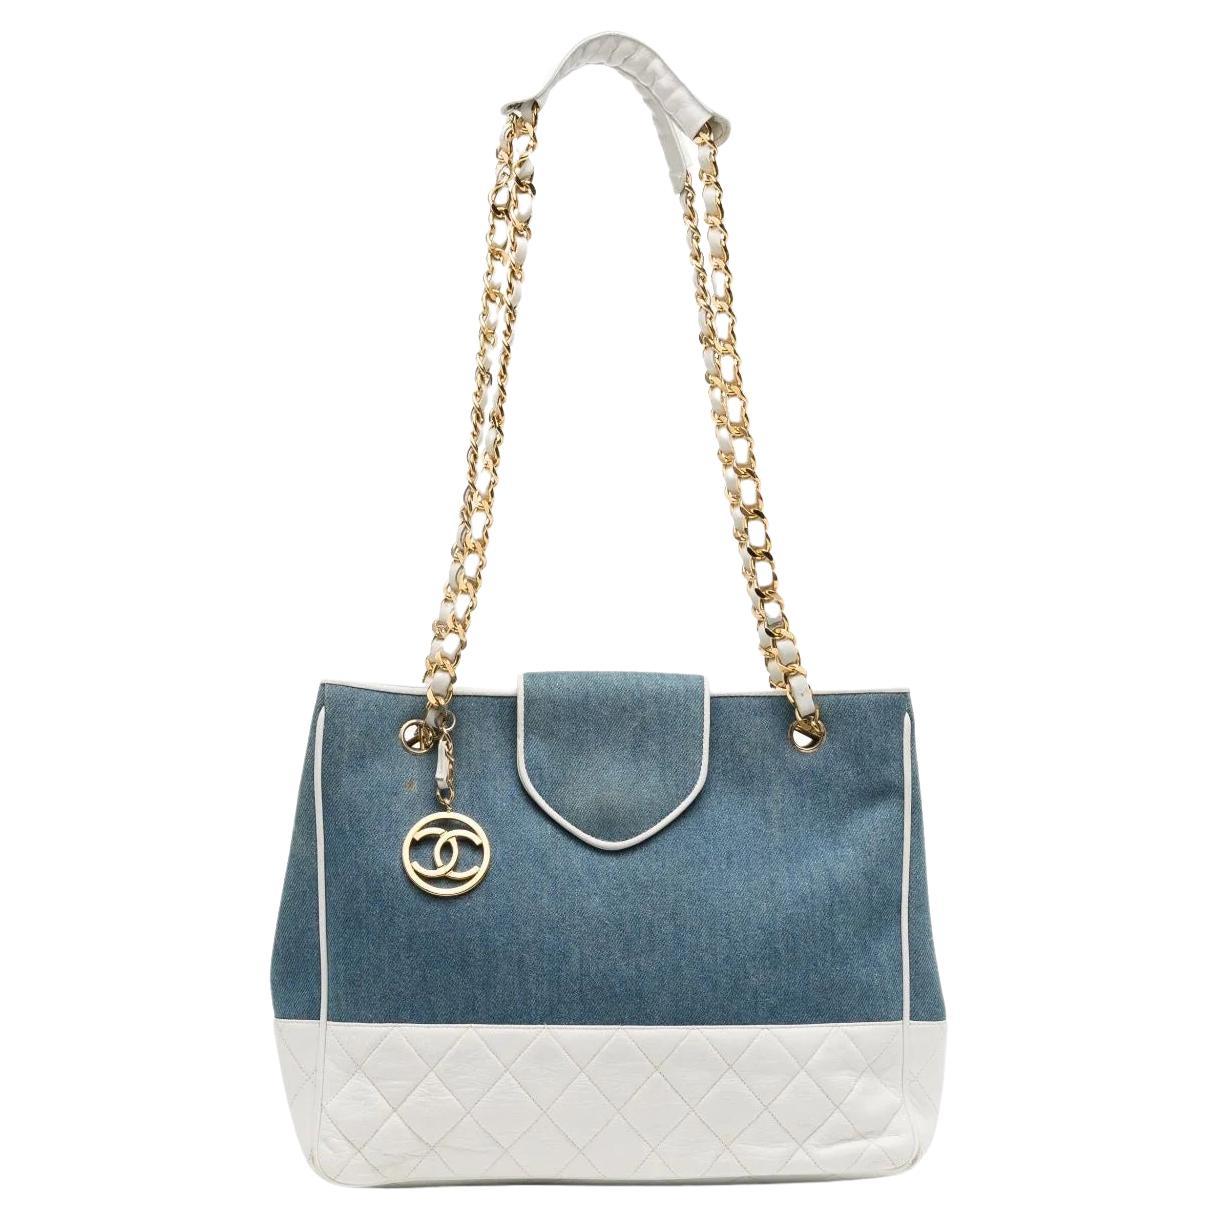 Chanel Denim Diamond Quilted Tote Bag